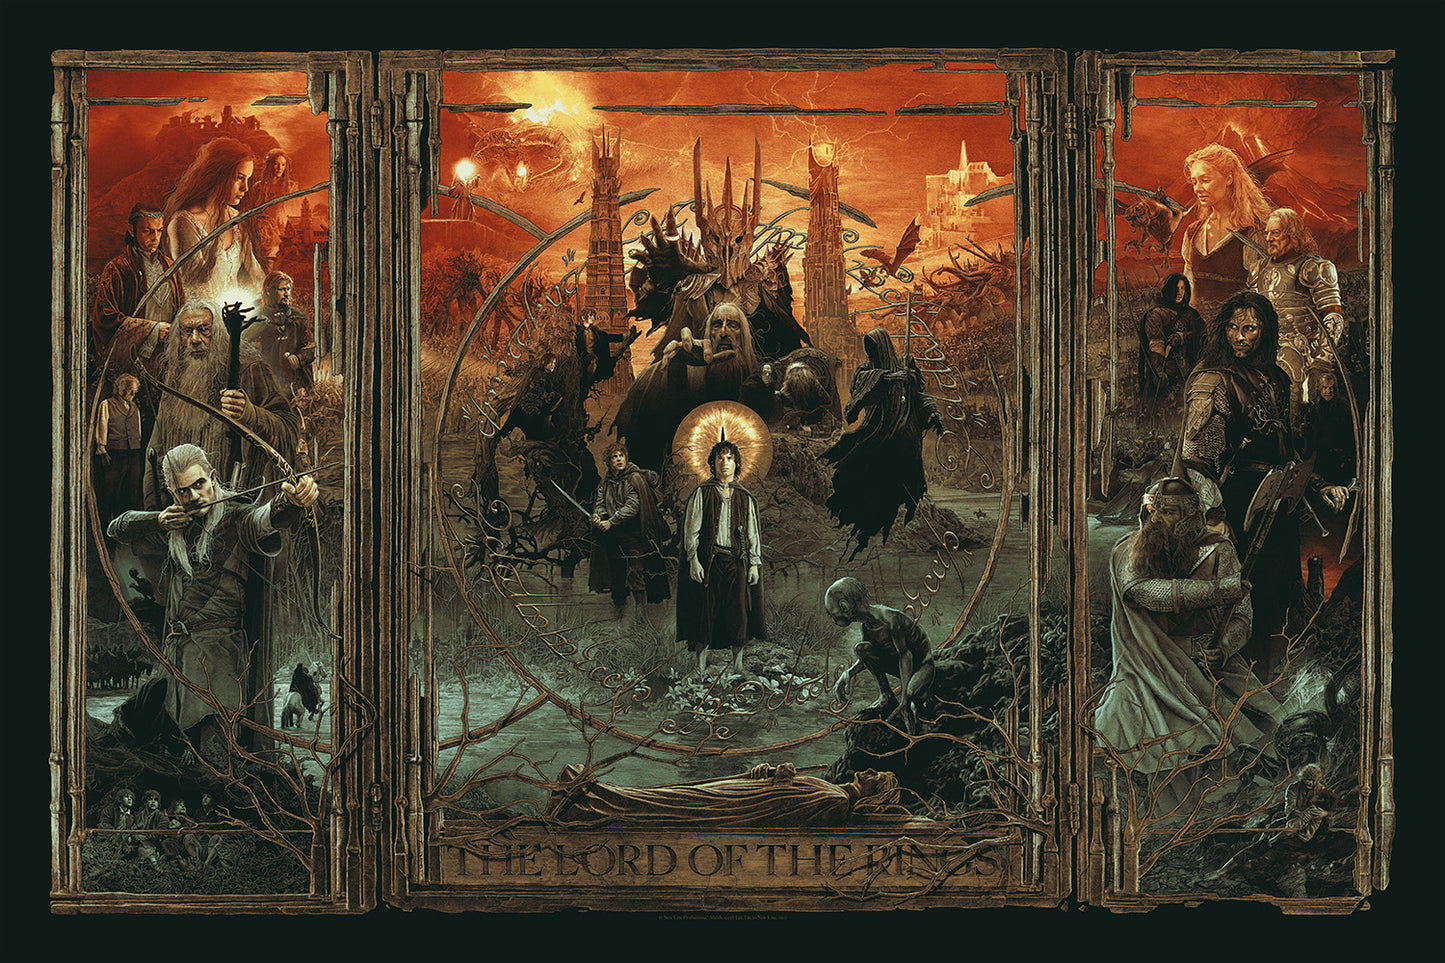 Gabz "The Lord of the Rings Triptych" Variant